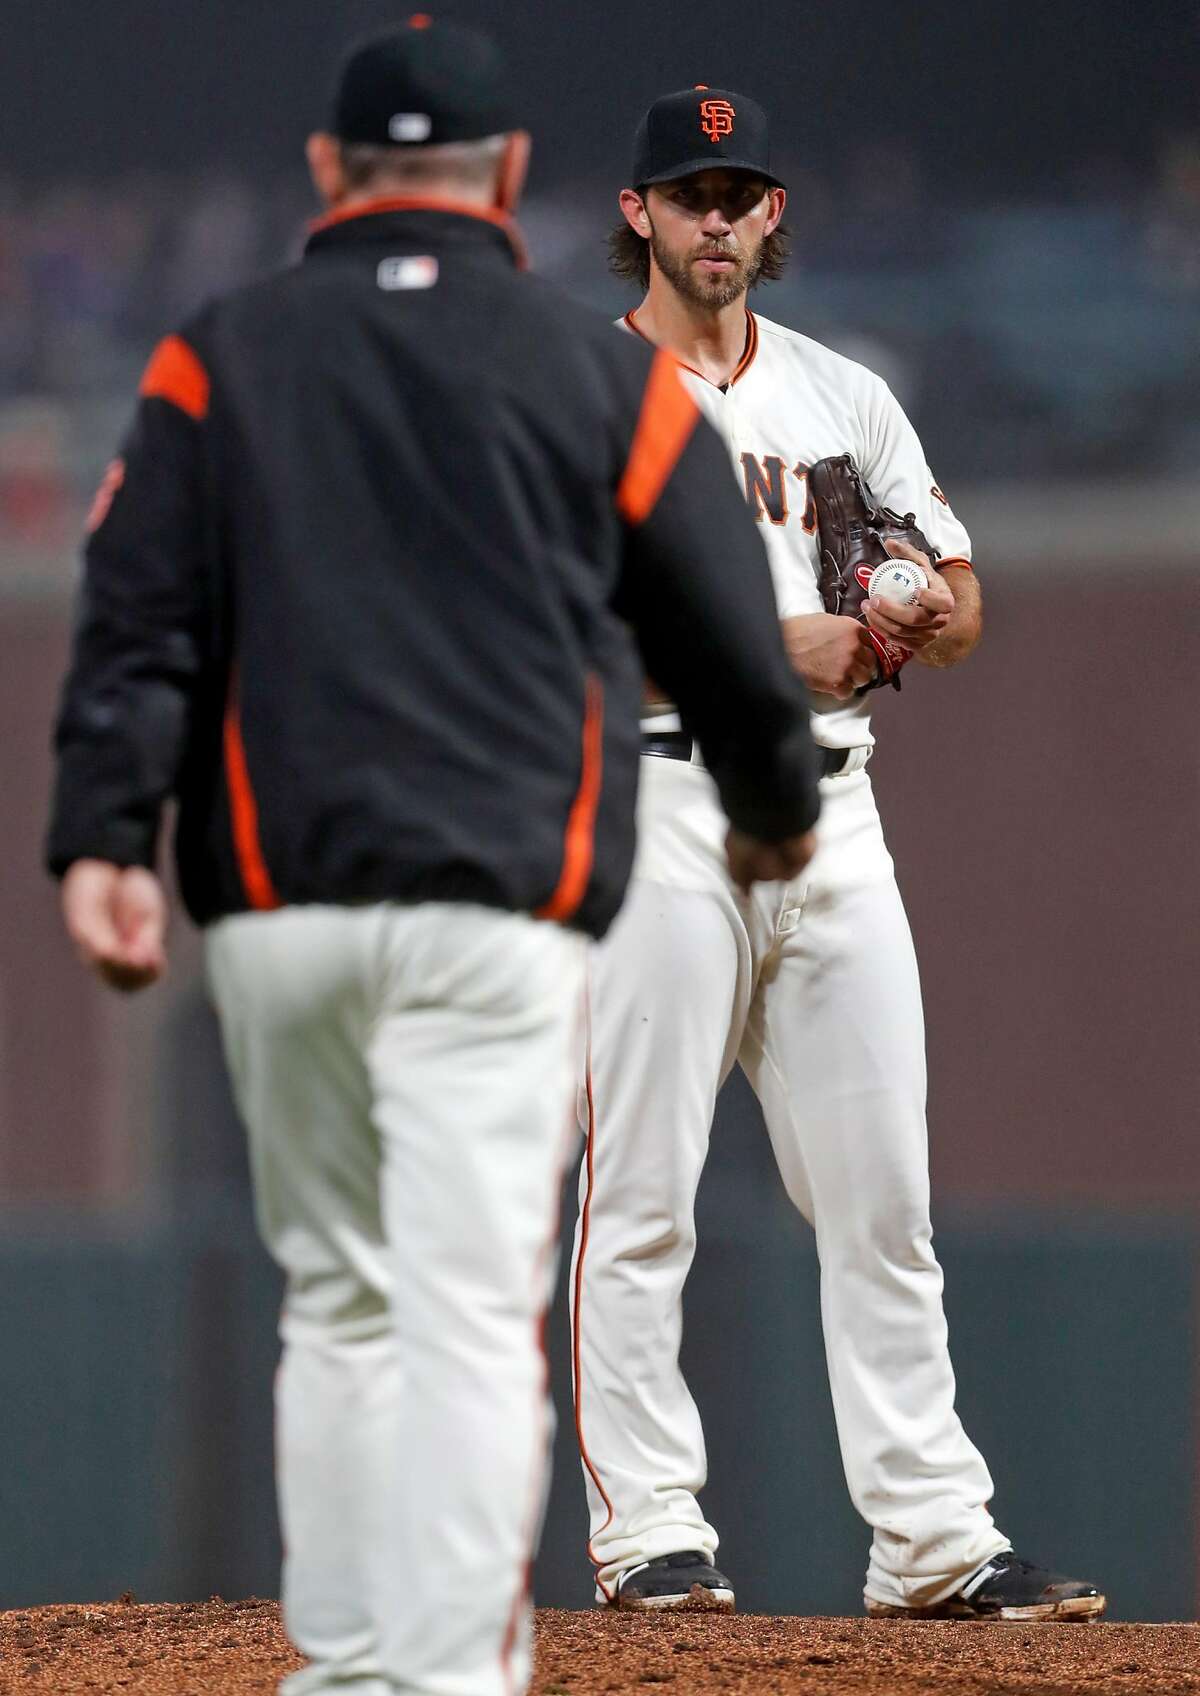 San Francisco Giants' Madison Bumgarner stares at manager Bruce Bochy during a 7th inning mound visit during MLB game against San Diego Padres at Oracle Park in San Francisco, Calif., on Monday, April 8, 2019.